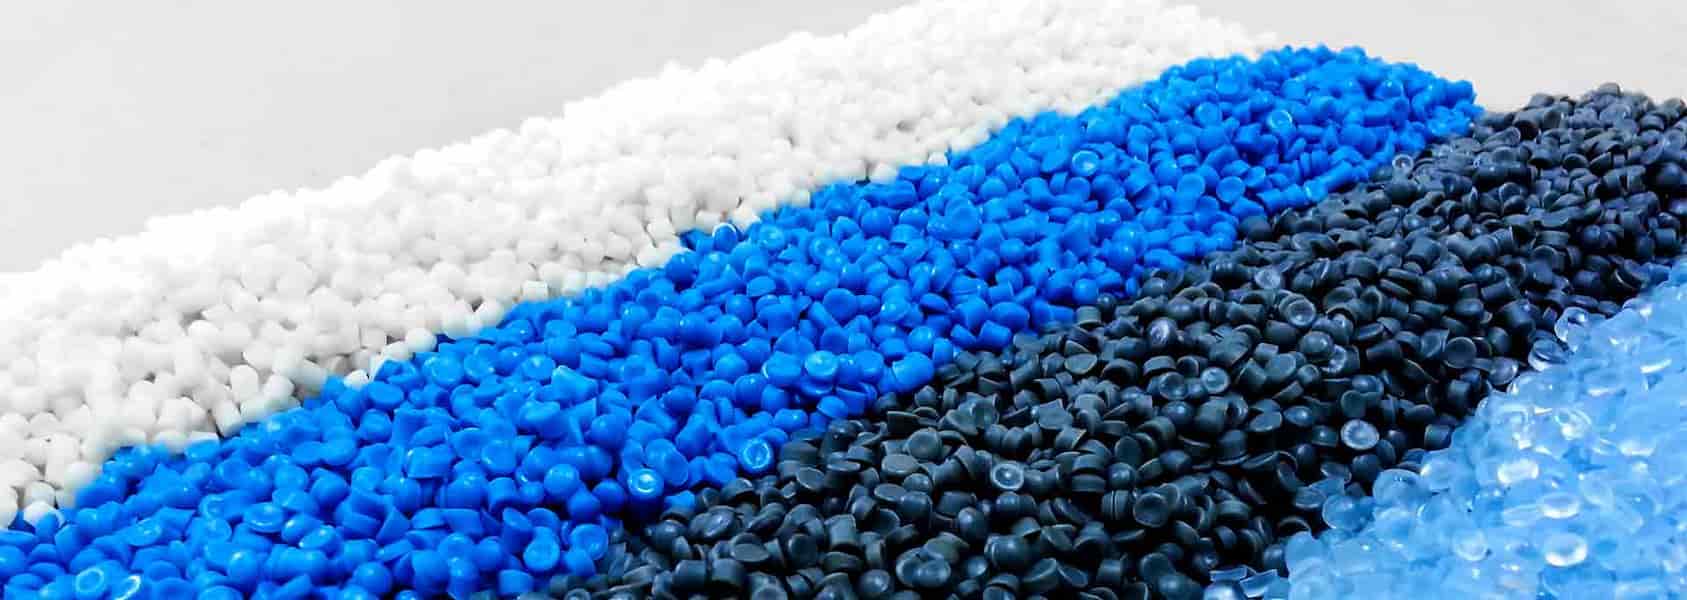  Buy The Latest Types of UAE plastic material At a Reasonable Price 